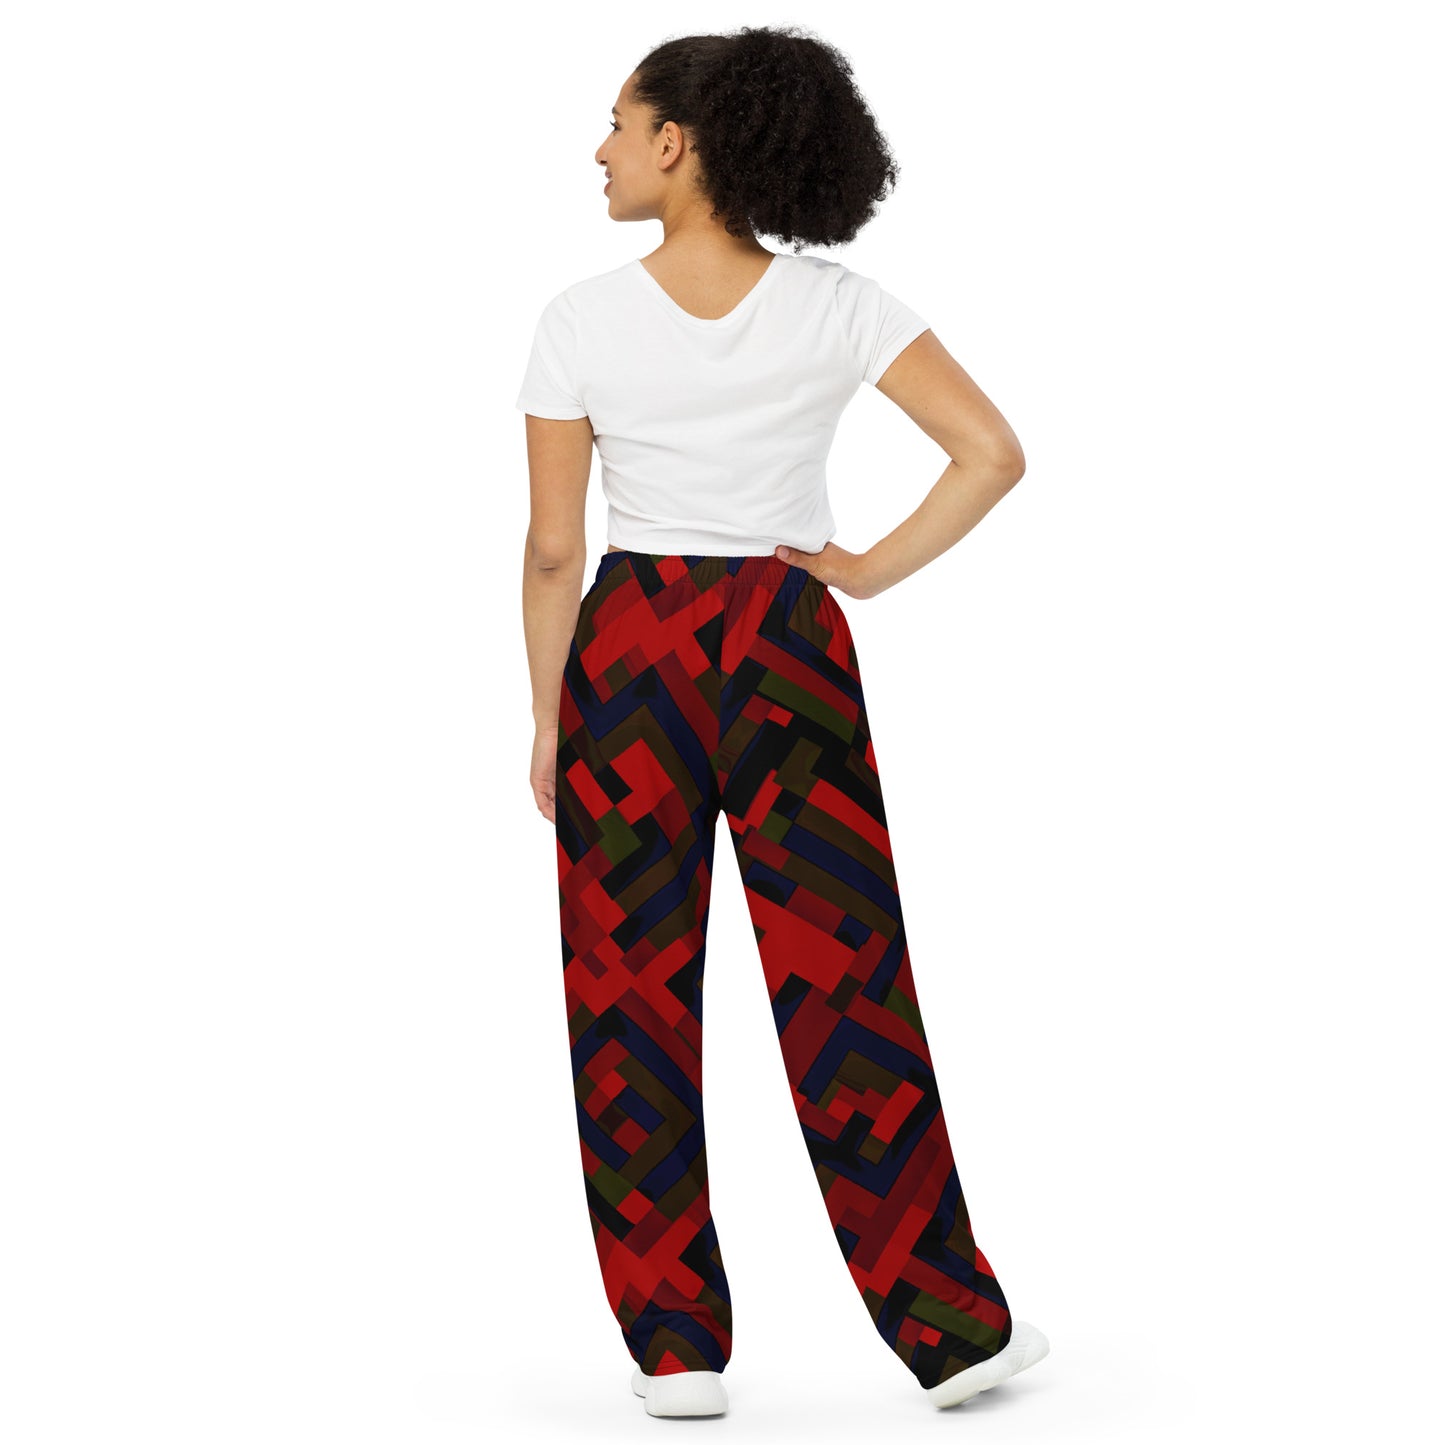 All-over print unisex wide-leg pants Red and Black